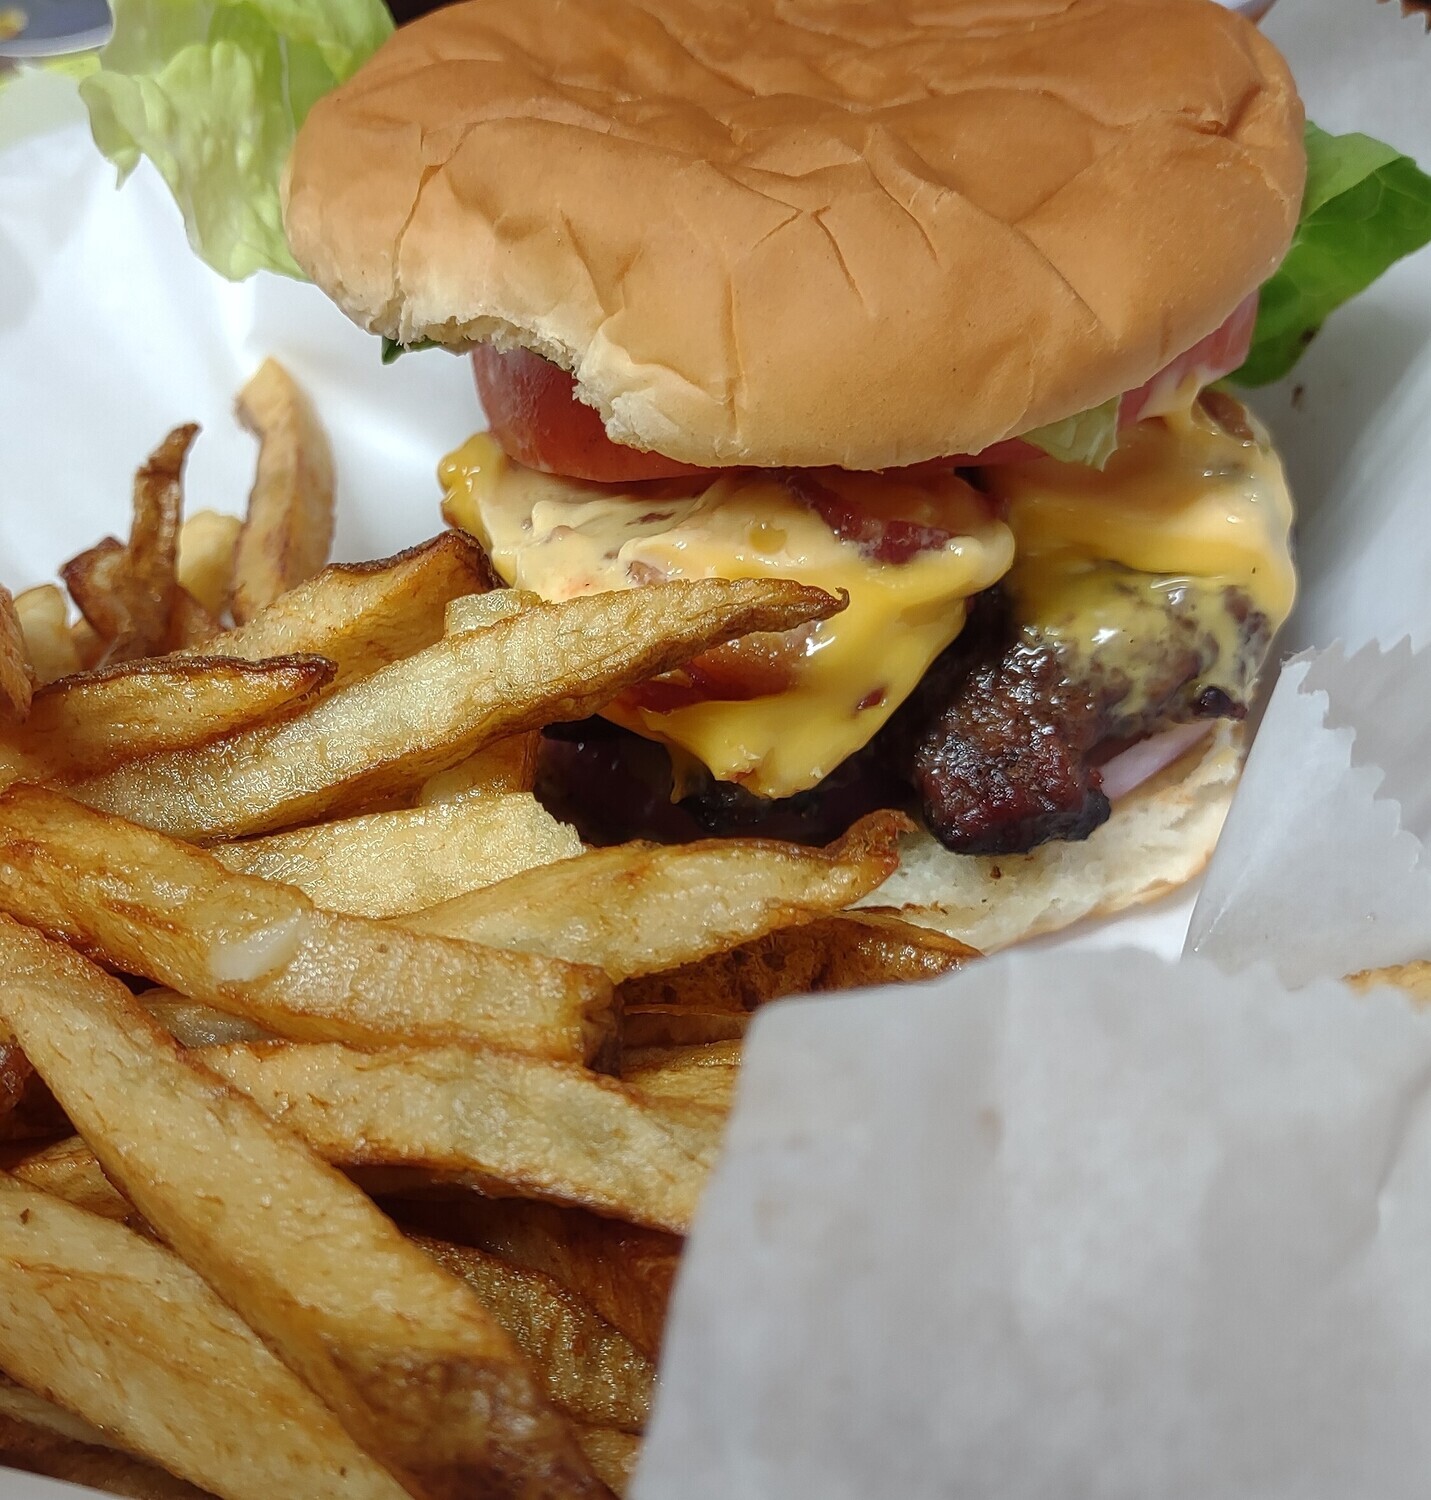 BACON CHEESEBURGER WITH FRIES